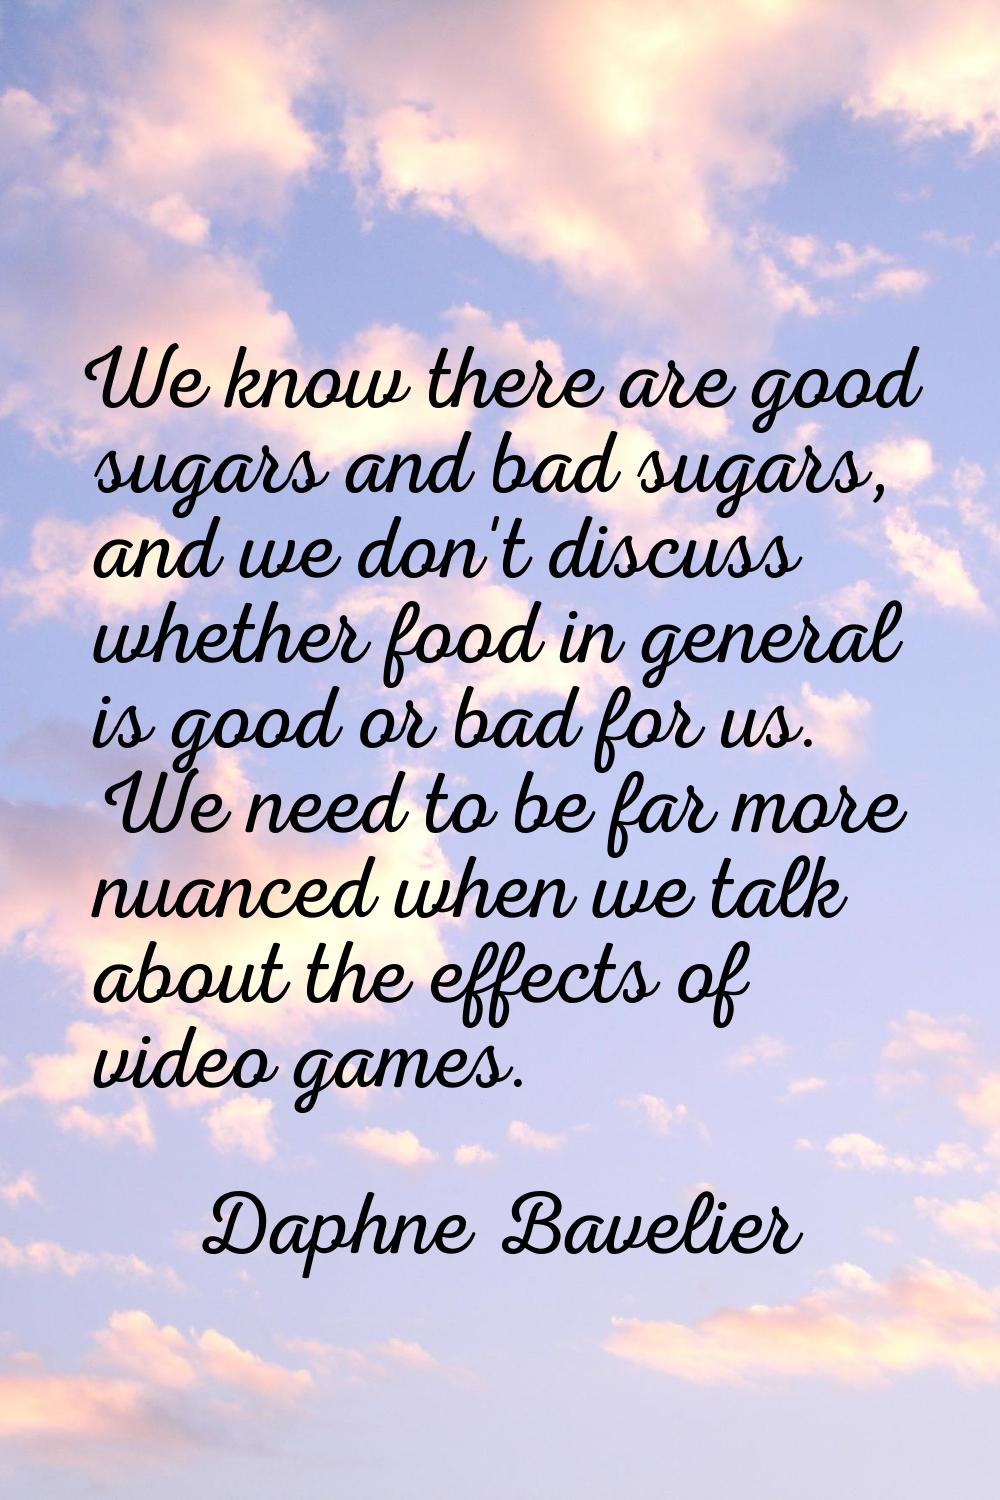 We know there are good sugars and bad sugars, and we don't discuss whether food in general is good 